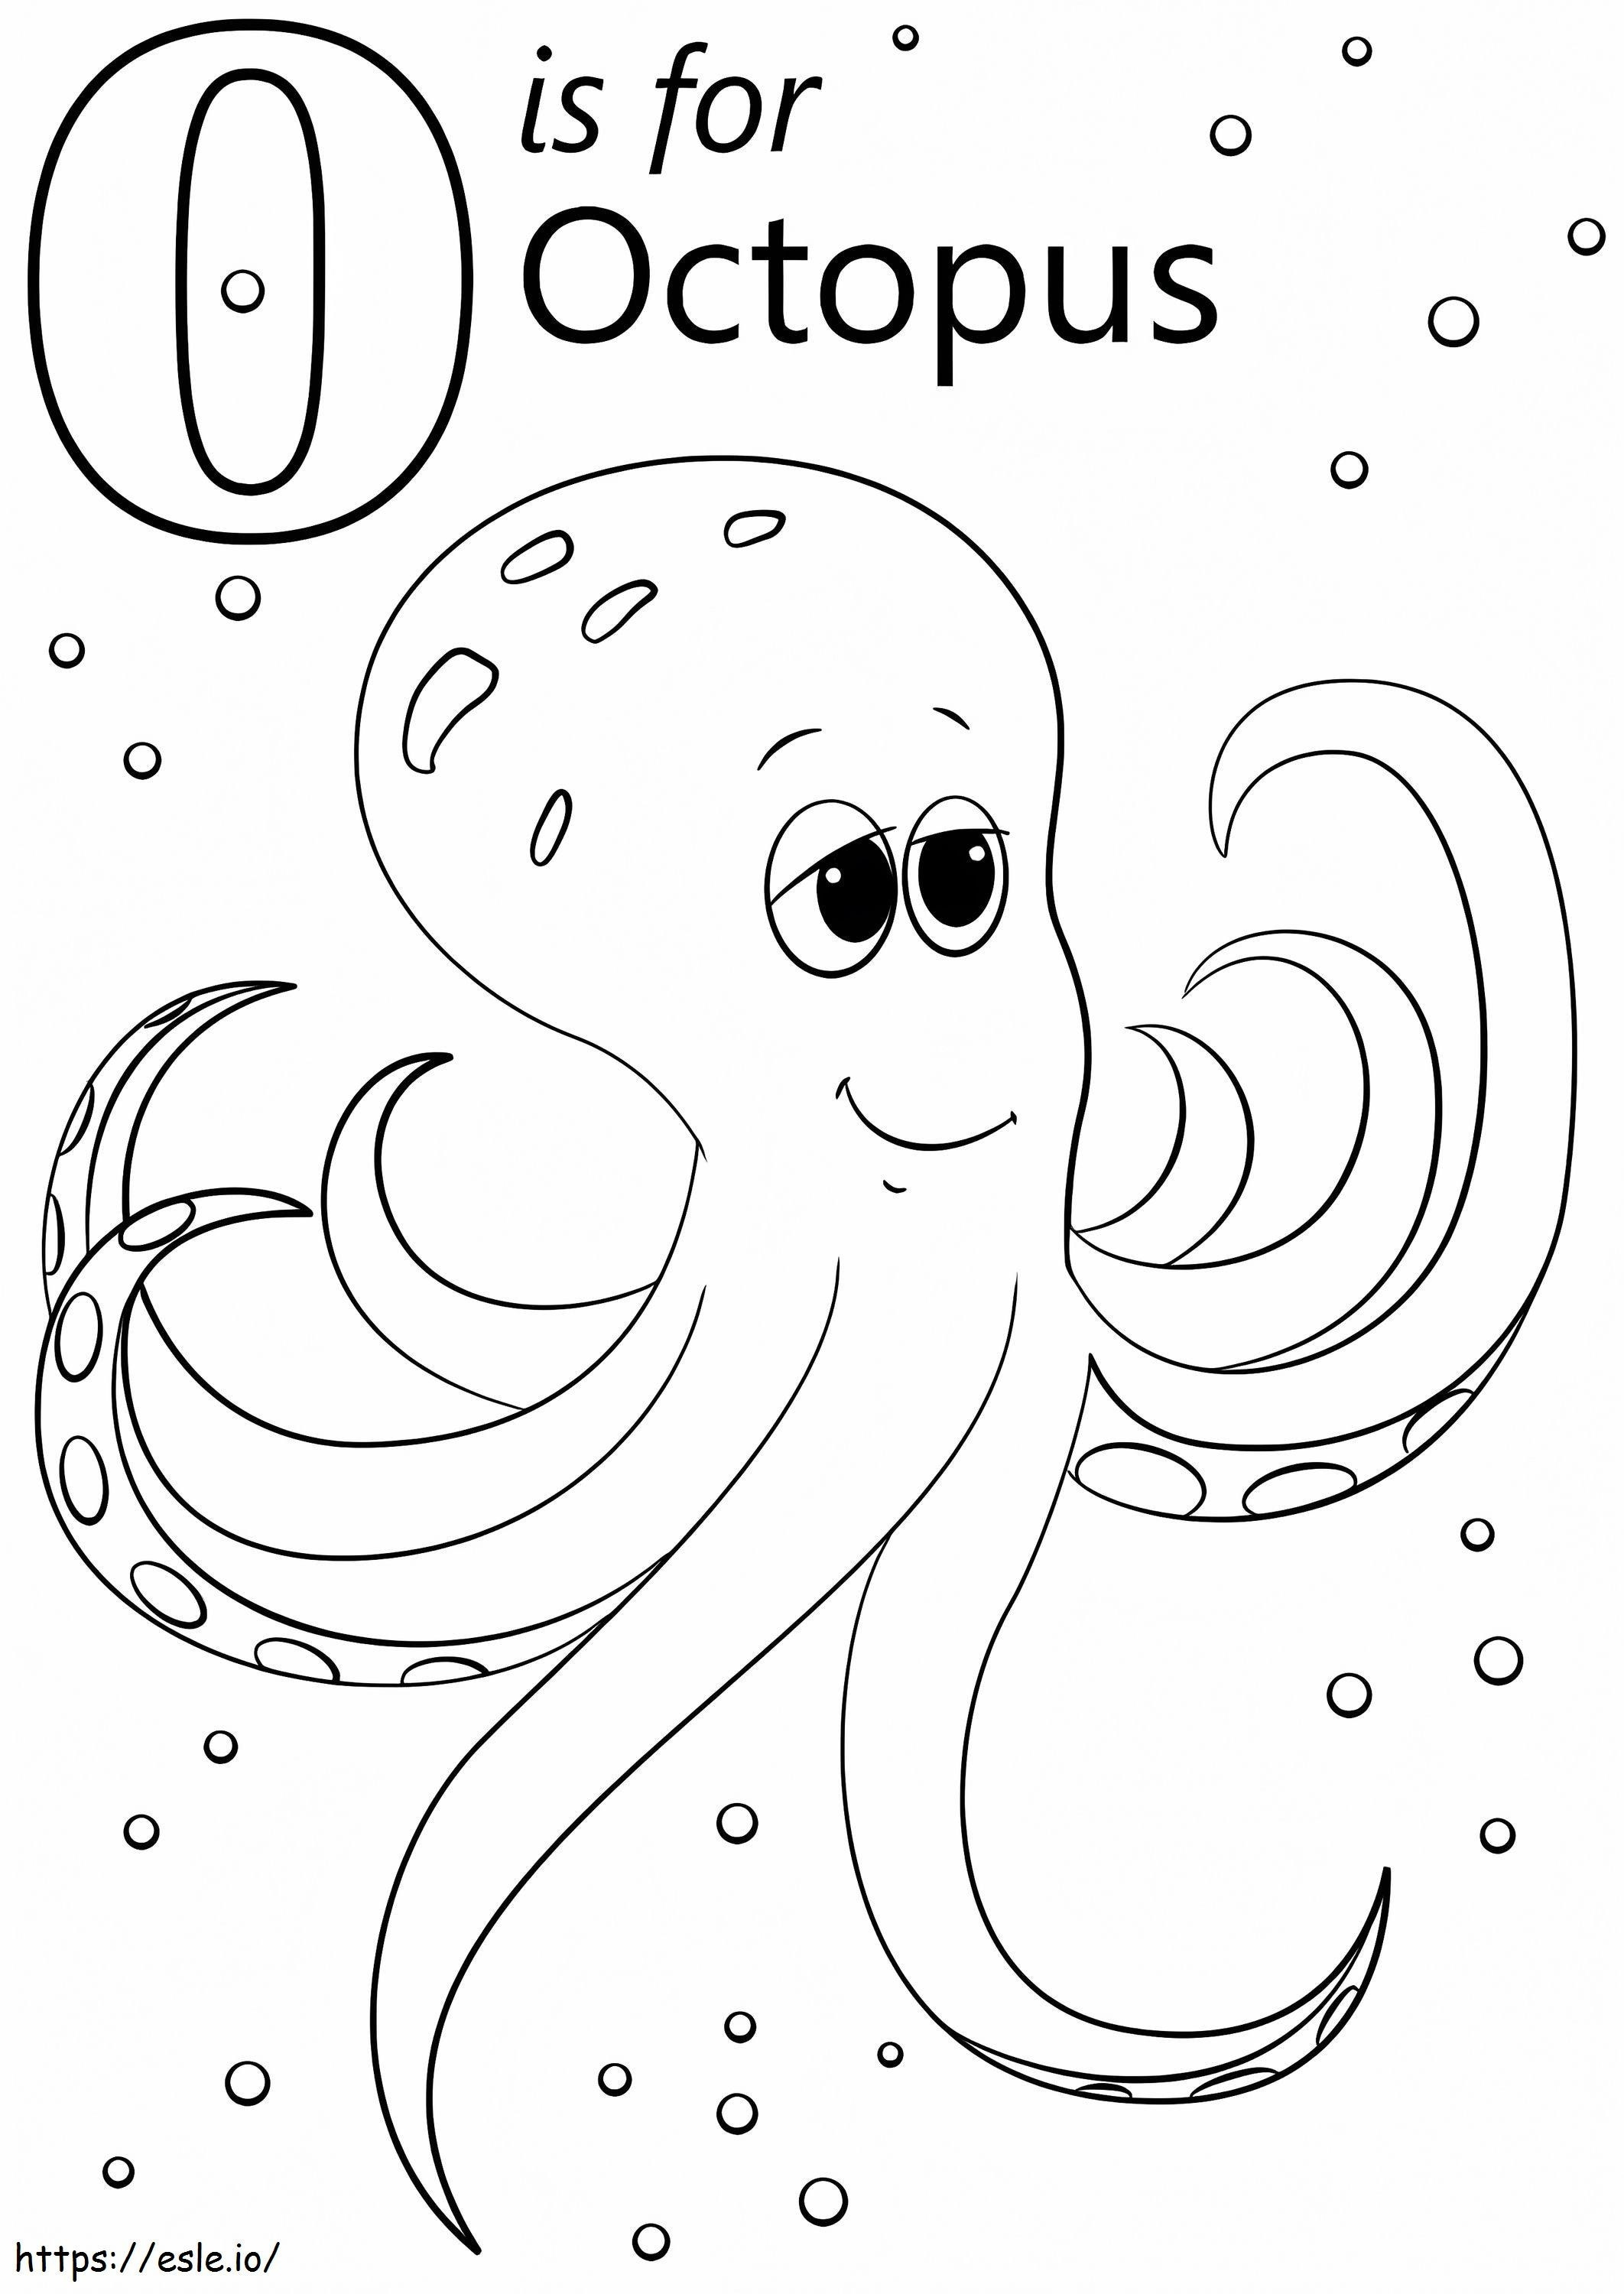 Octopus Letter O coloring page